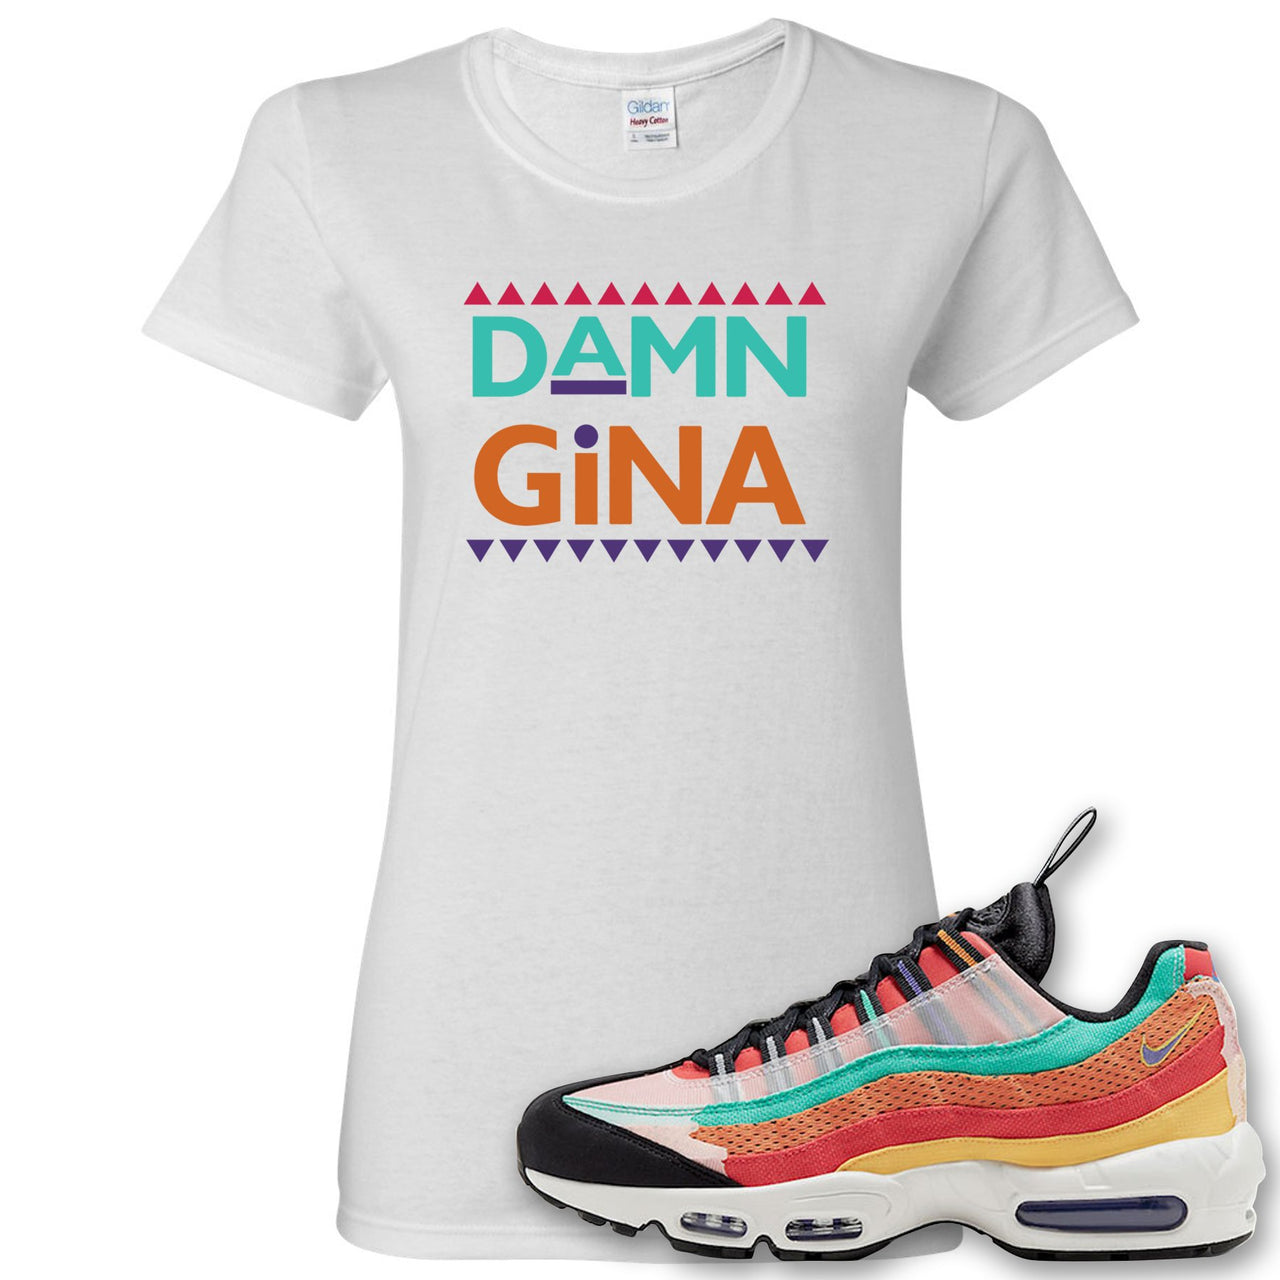 Air Max 95 Black History Month Sneaker White Women's T Shirt | Women's Tees to match Nike Air Max 95 Black History Month Shoes | Damn Gina